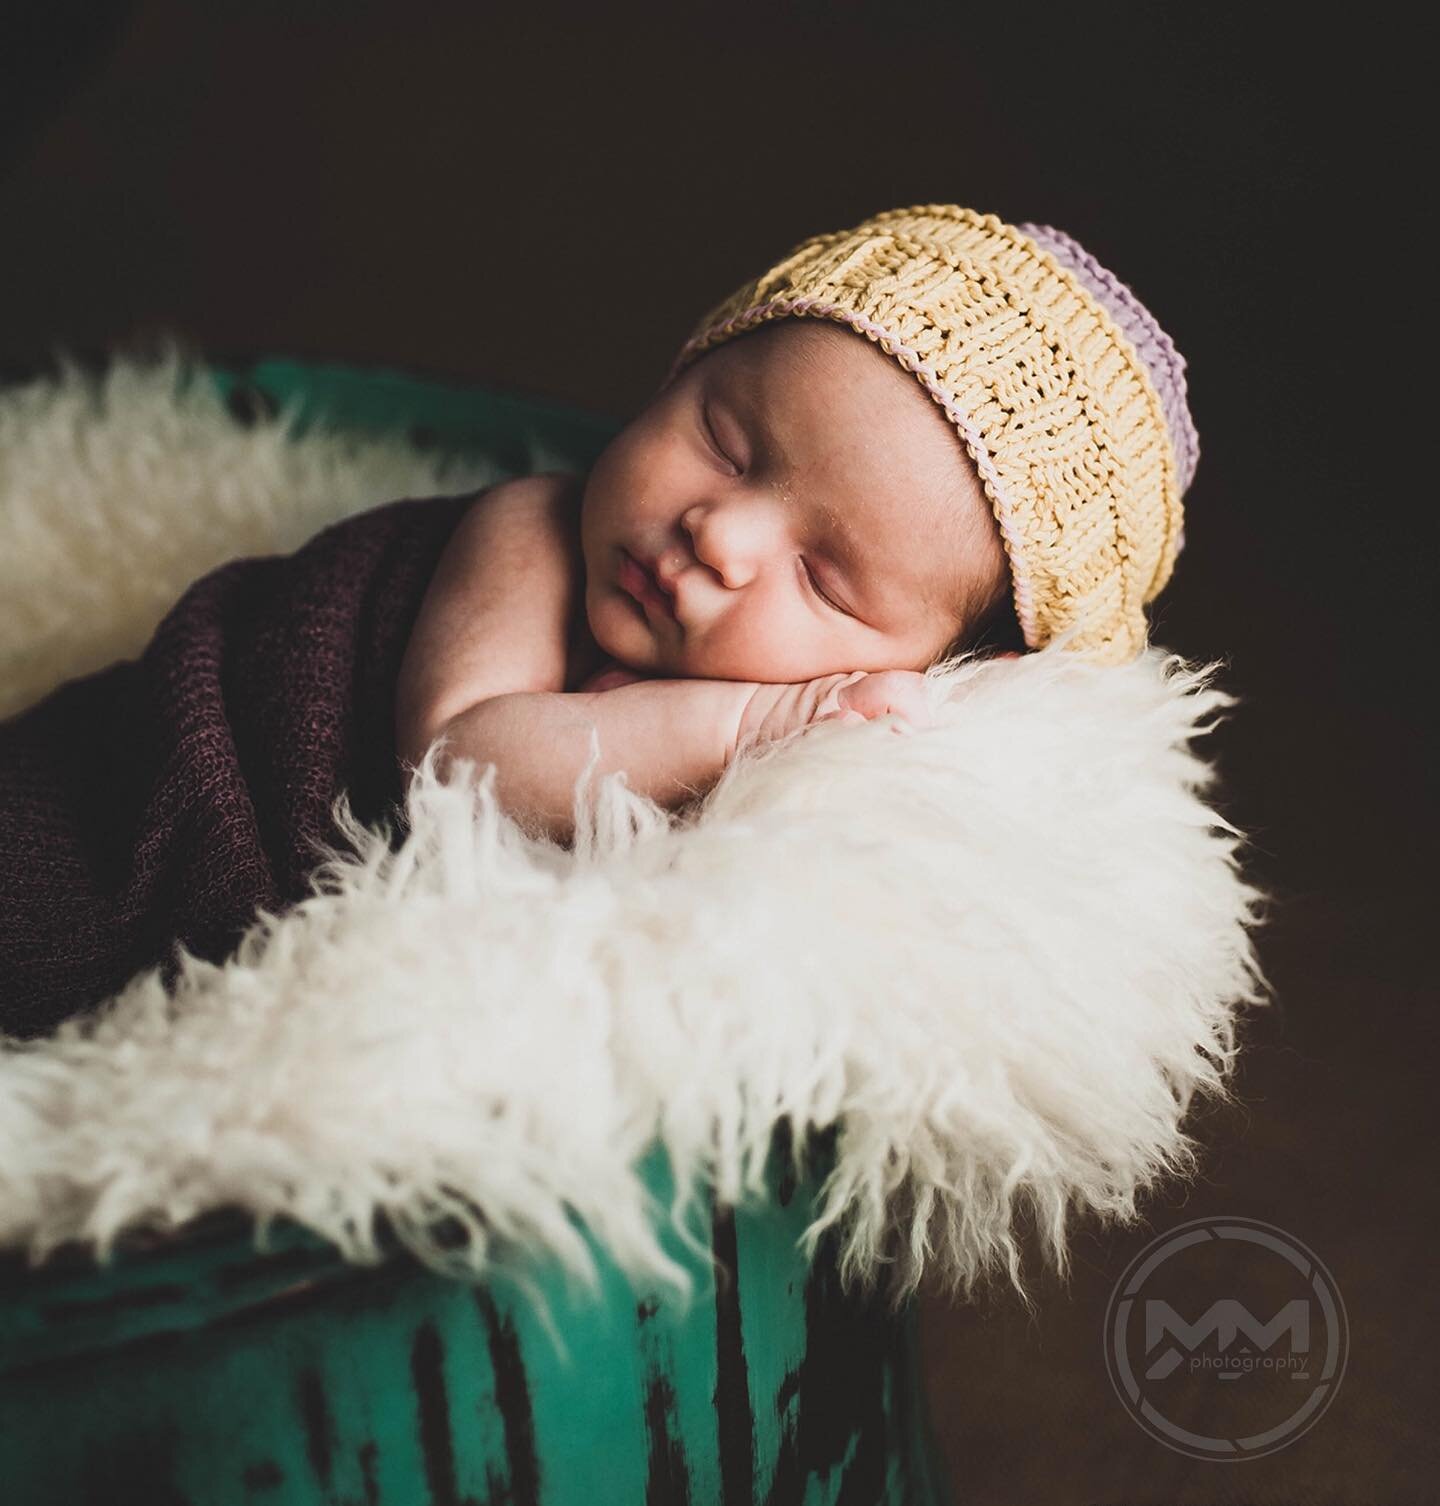 Sophia in a bucket! This beautiful angel was 23 days old when we did the photo session. My newborn bucket was too small for her so I got this bigger one, so she could sleep comfortably and relaxed in it :)